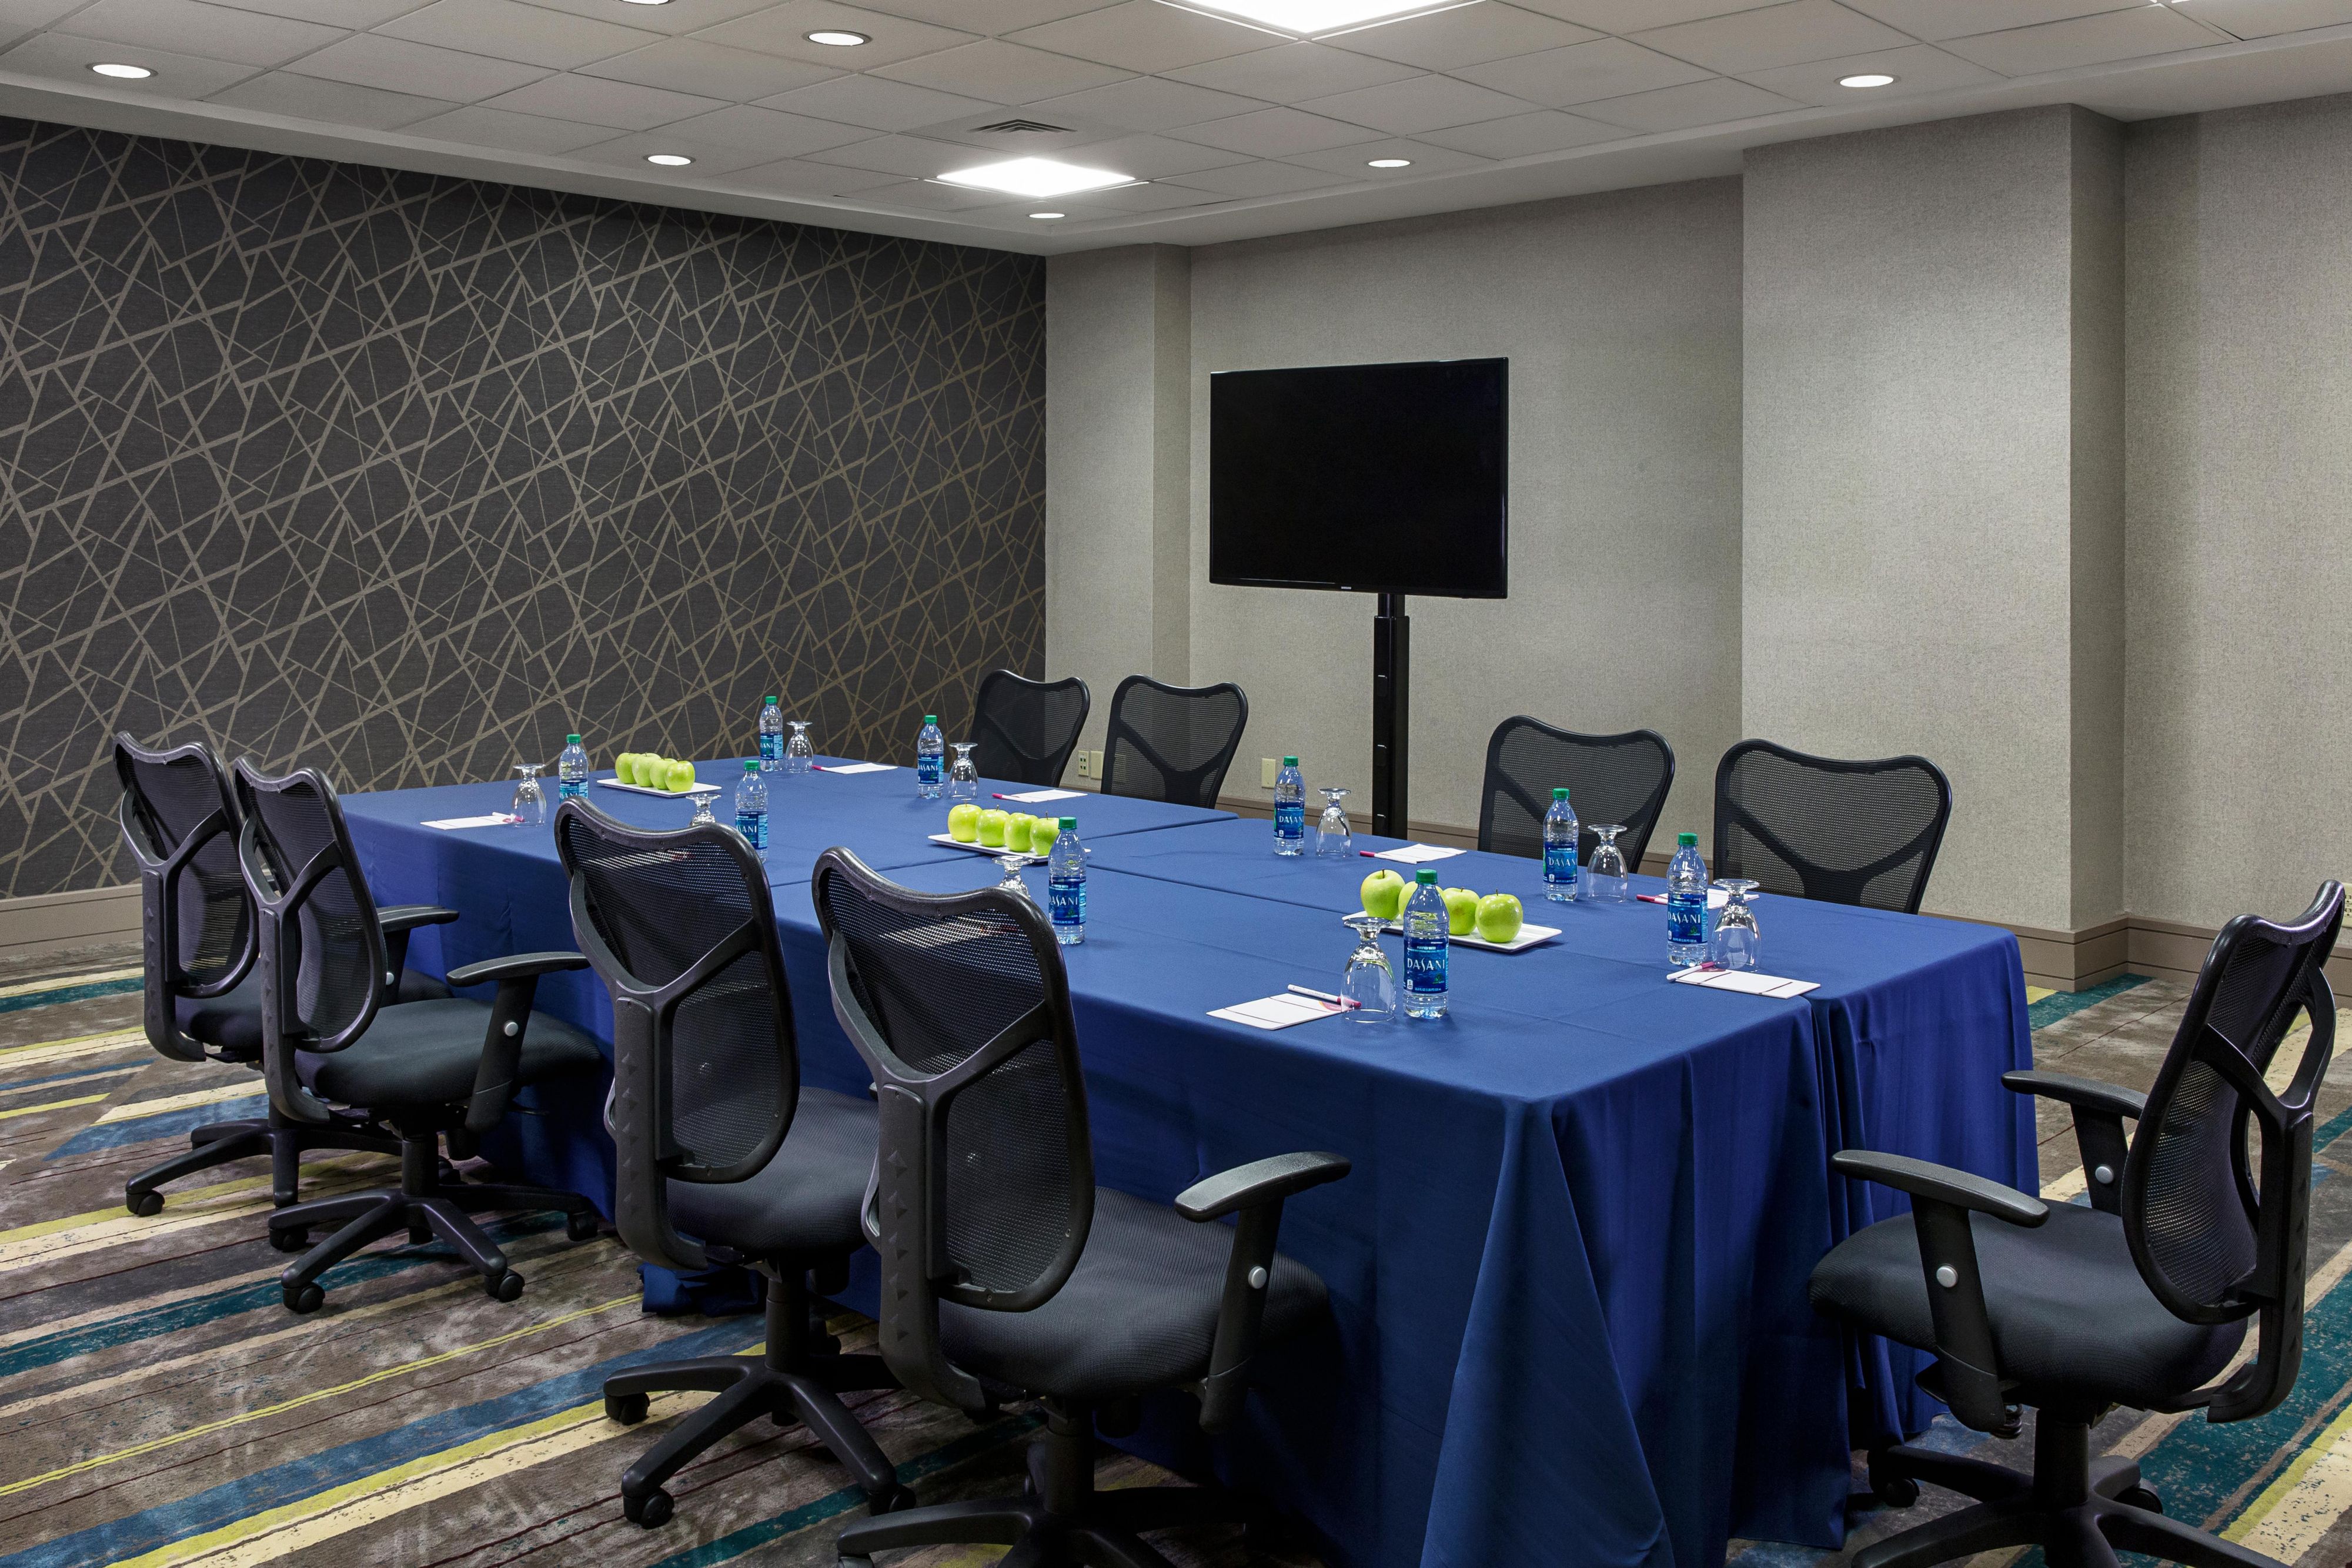 Several brand new breakout rooms, perfect for exclusive gatherings